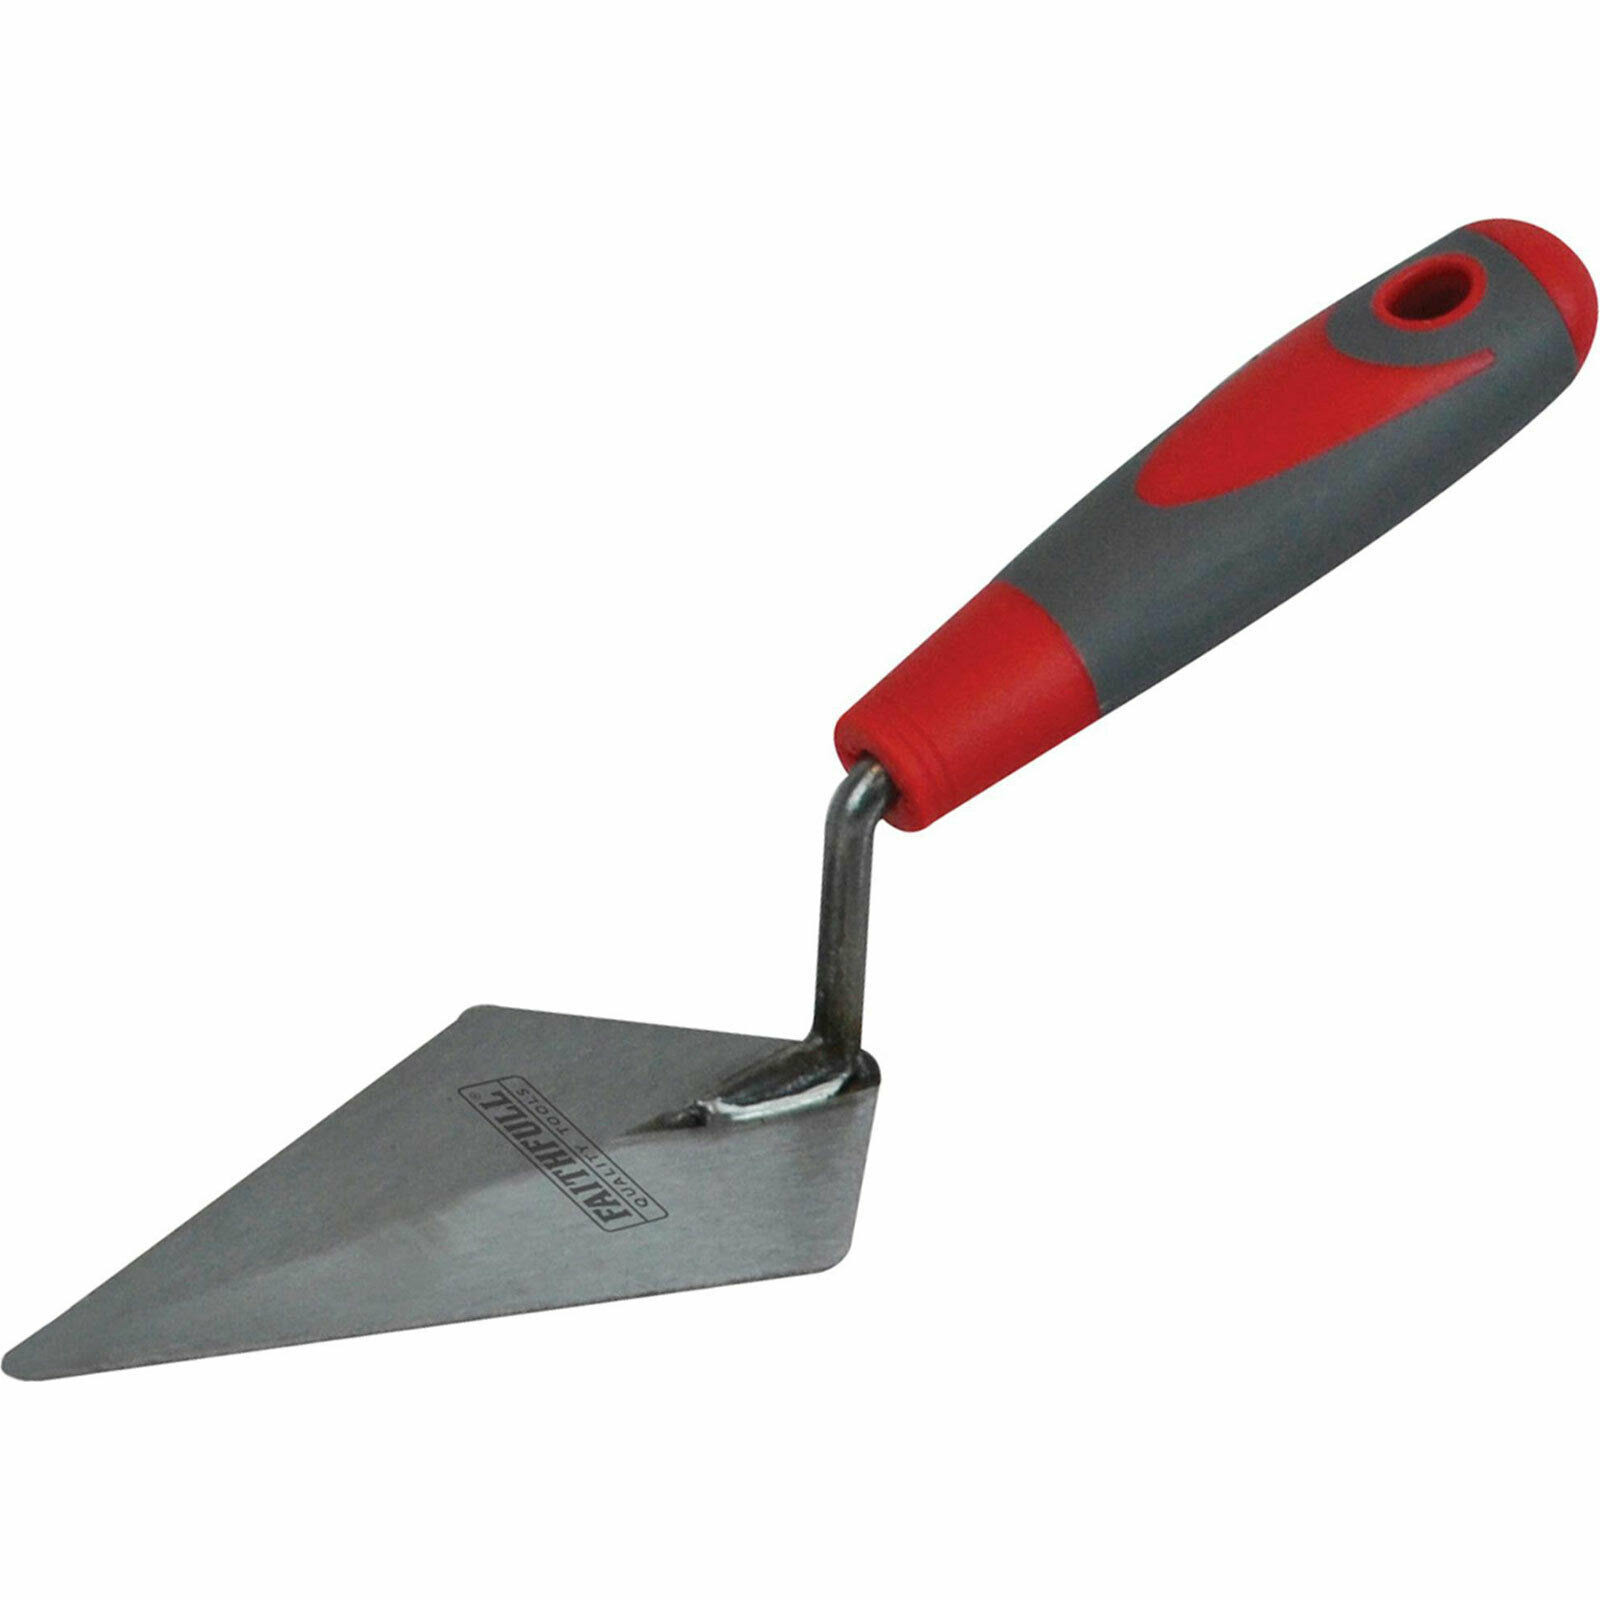 Faithfull Pointing Trowel - Soft Grip Handle 6in